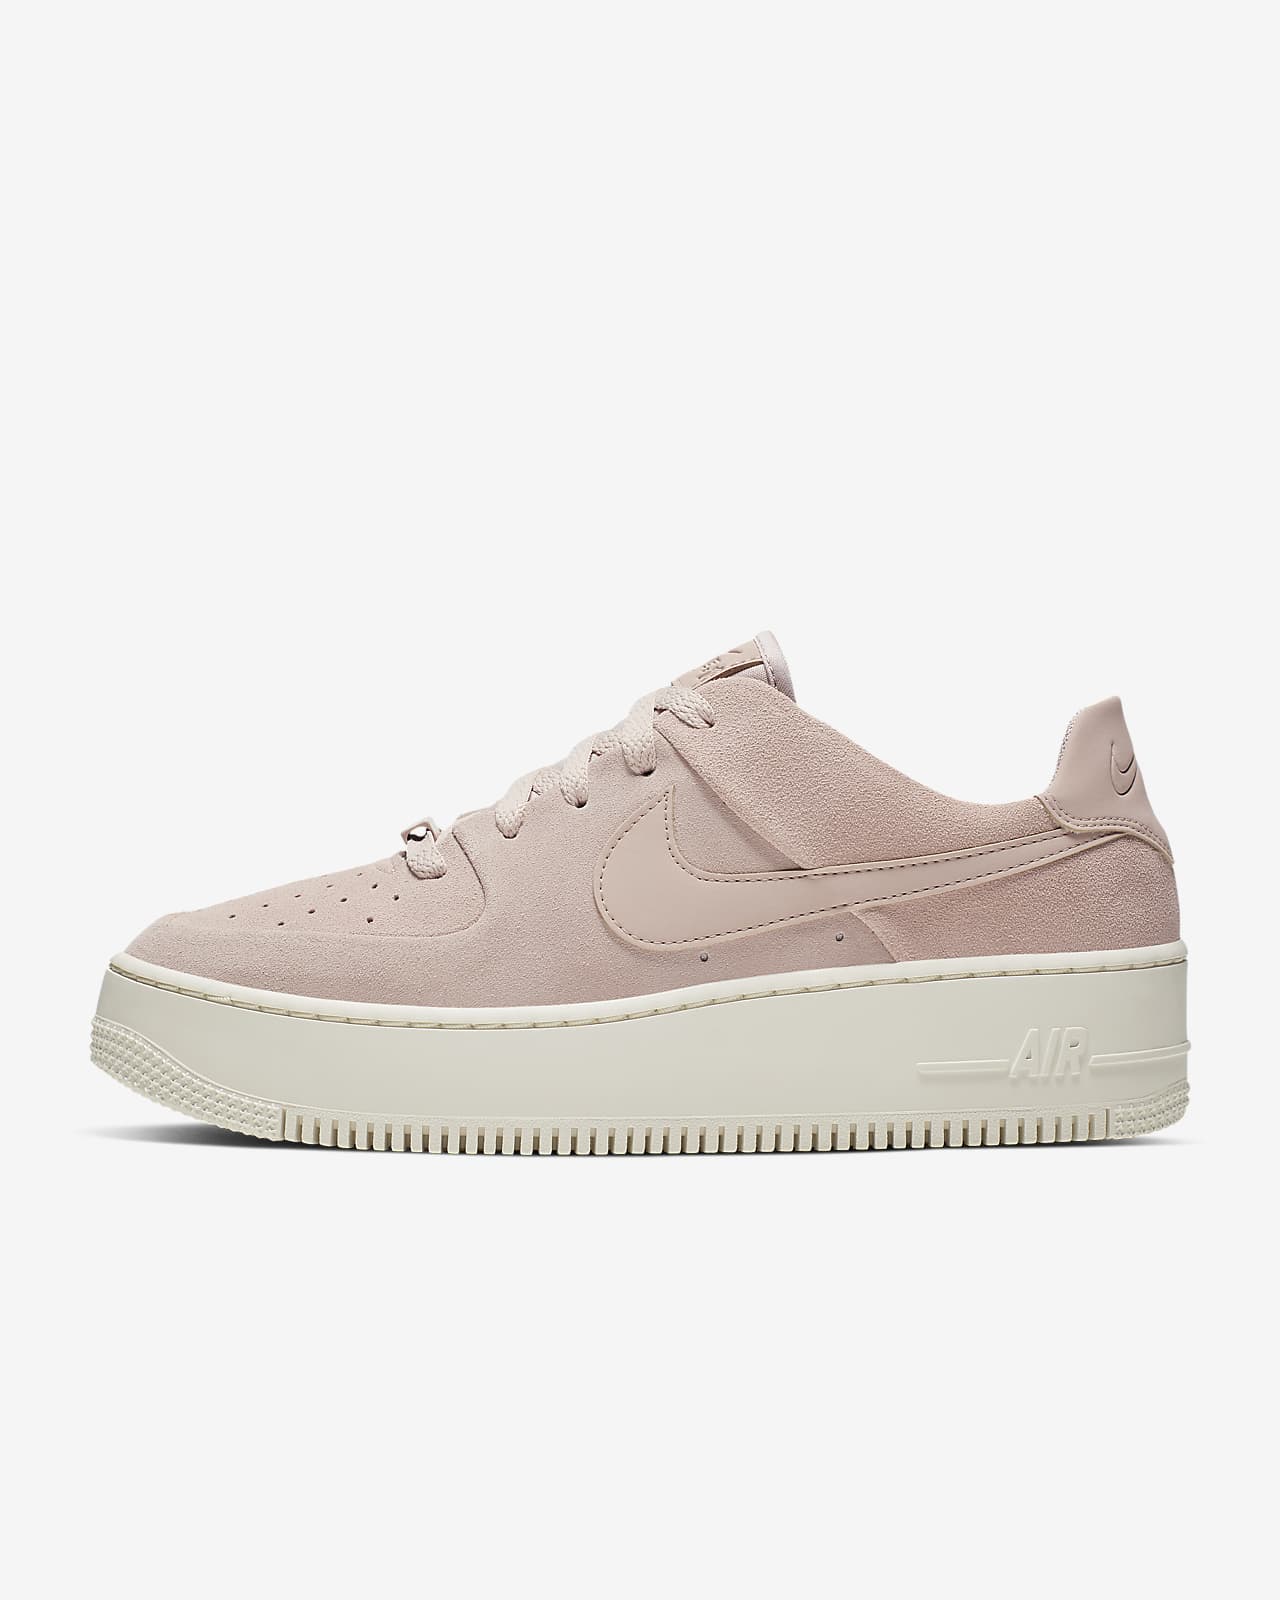 Nike Air Force 1 Sage Low Women's Shoes